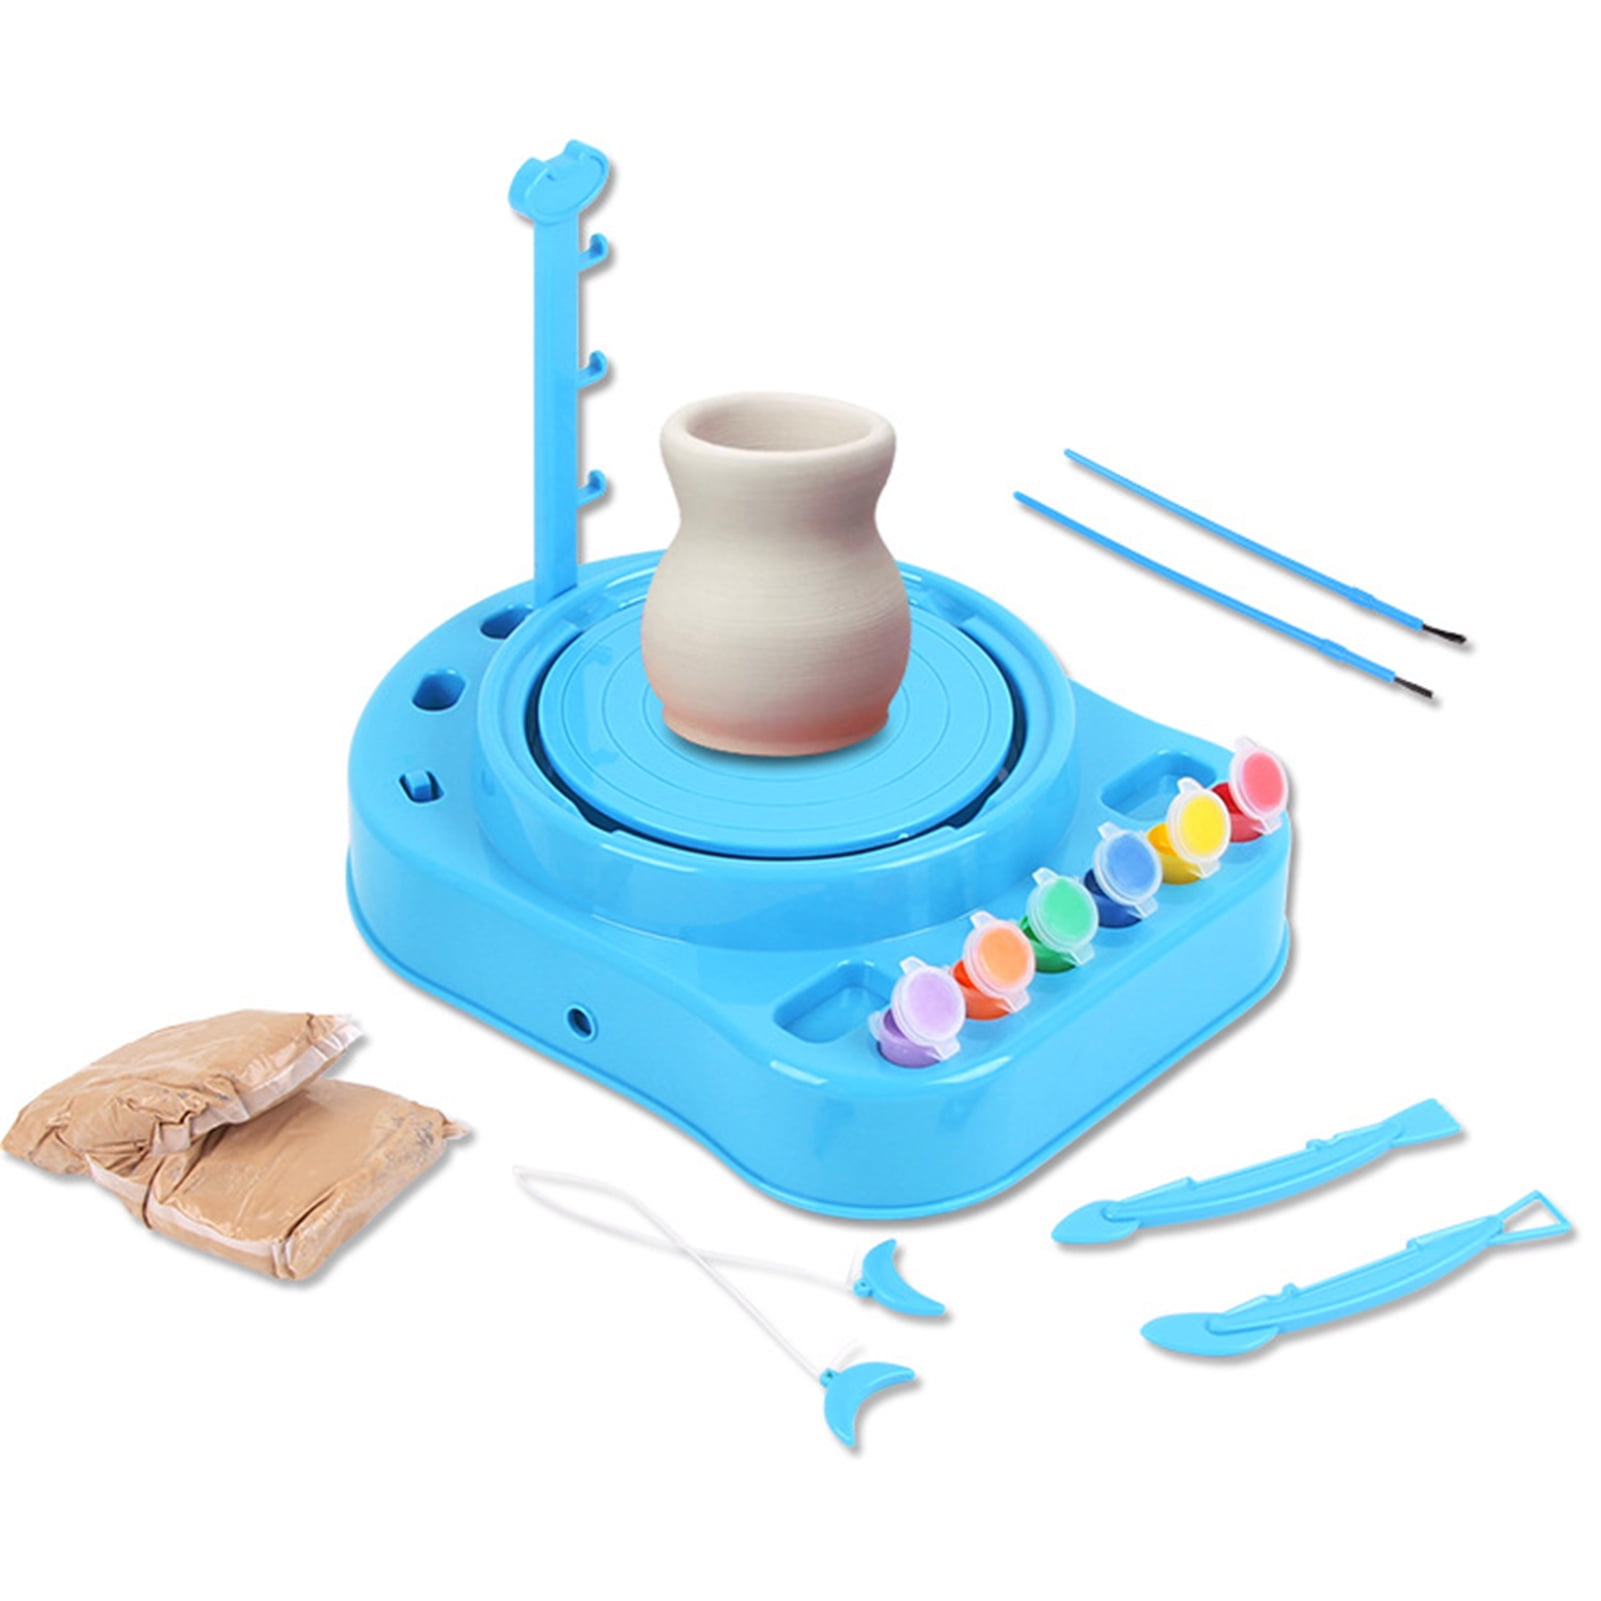 Electric Pottery Wheel Art Craft Kit Arts And Crafts Kids Toys